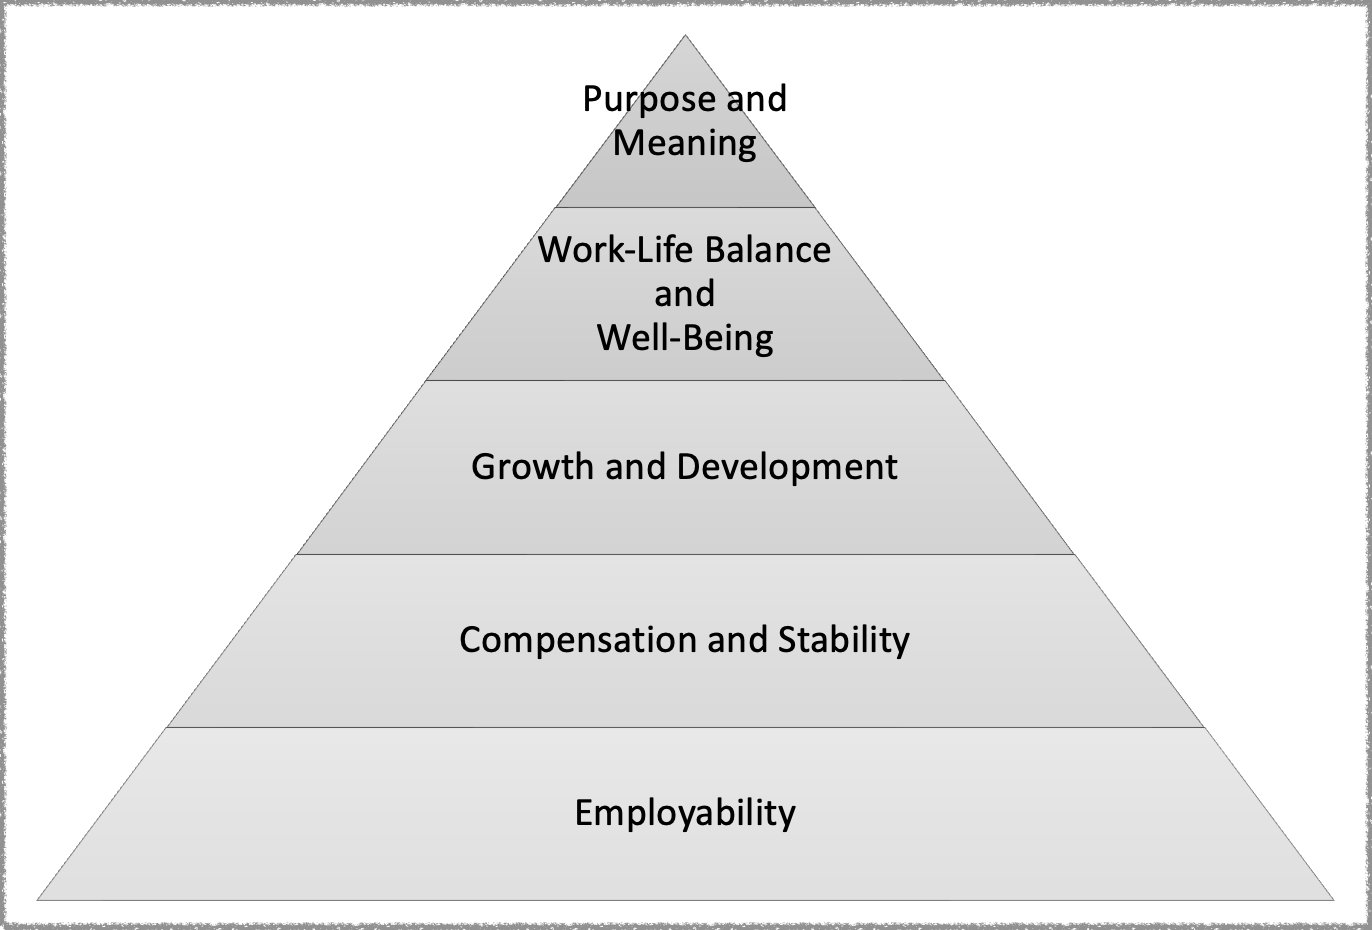 Adaptation of Maslow's pyramid of needs, with five layers, from bottom to top: Employability, Compensation and Stability, Growth and Development, Work-Life Balance and Well-Being, Purpose and Meaning.